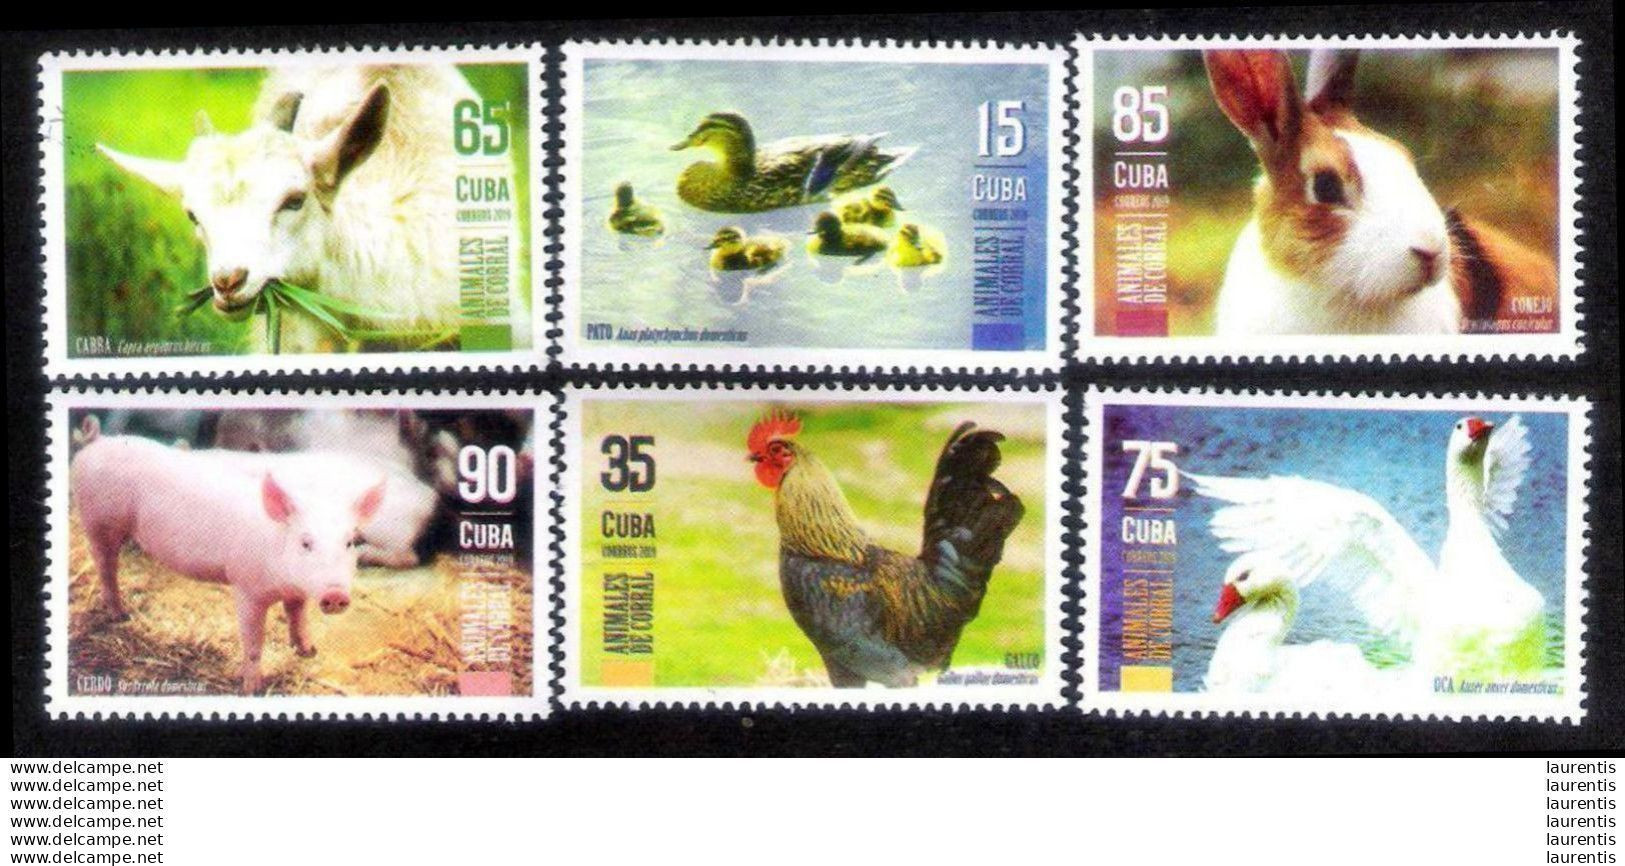 D2859  Ducks-Pigs-Roosters-Rabbits-Geese-Goats-Cows - 2019 - MNH - Cb - 2,25 - Granjas